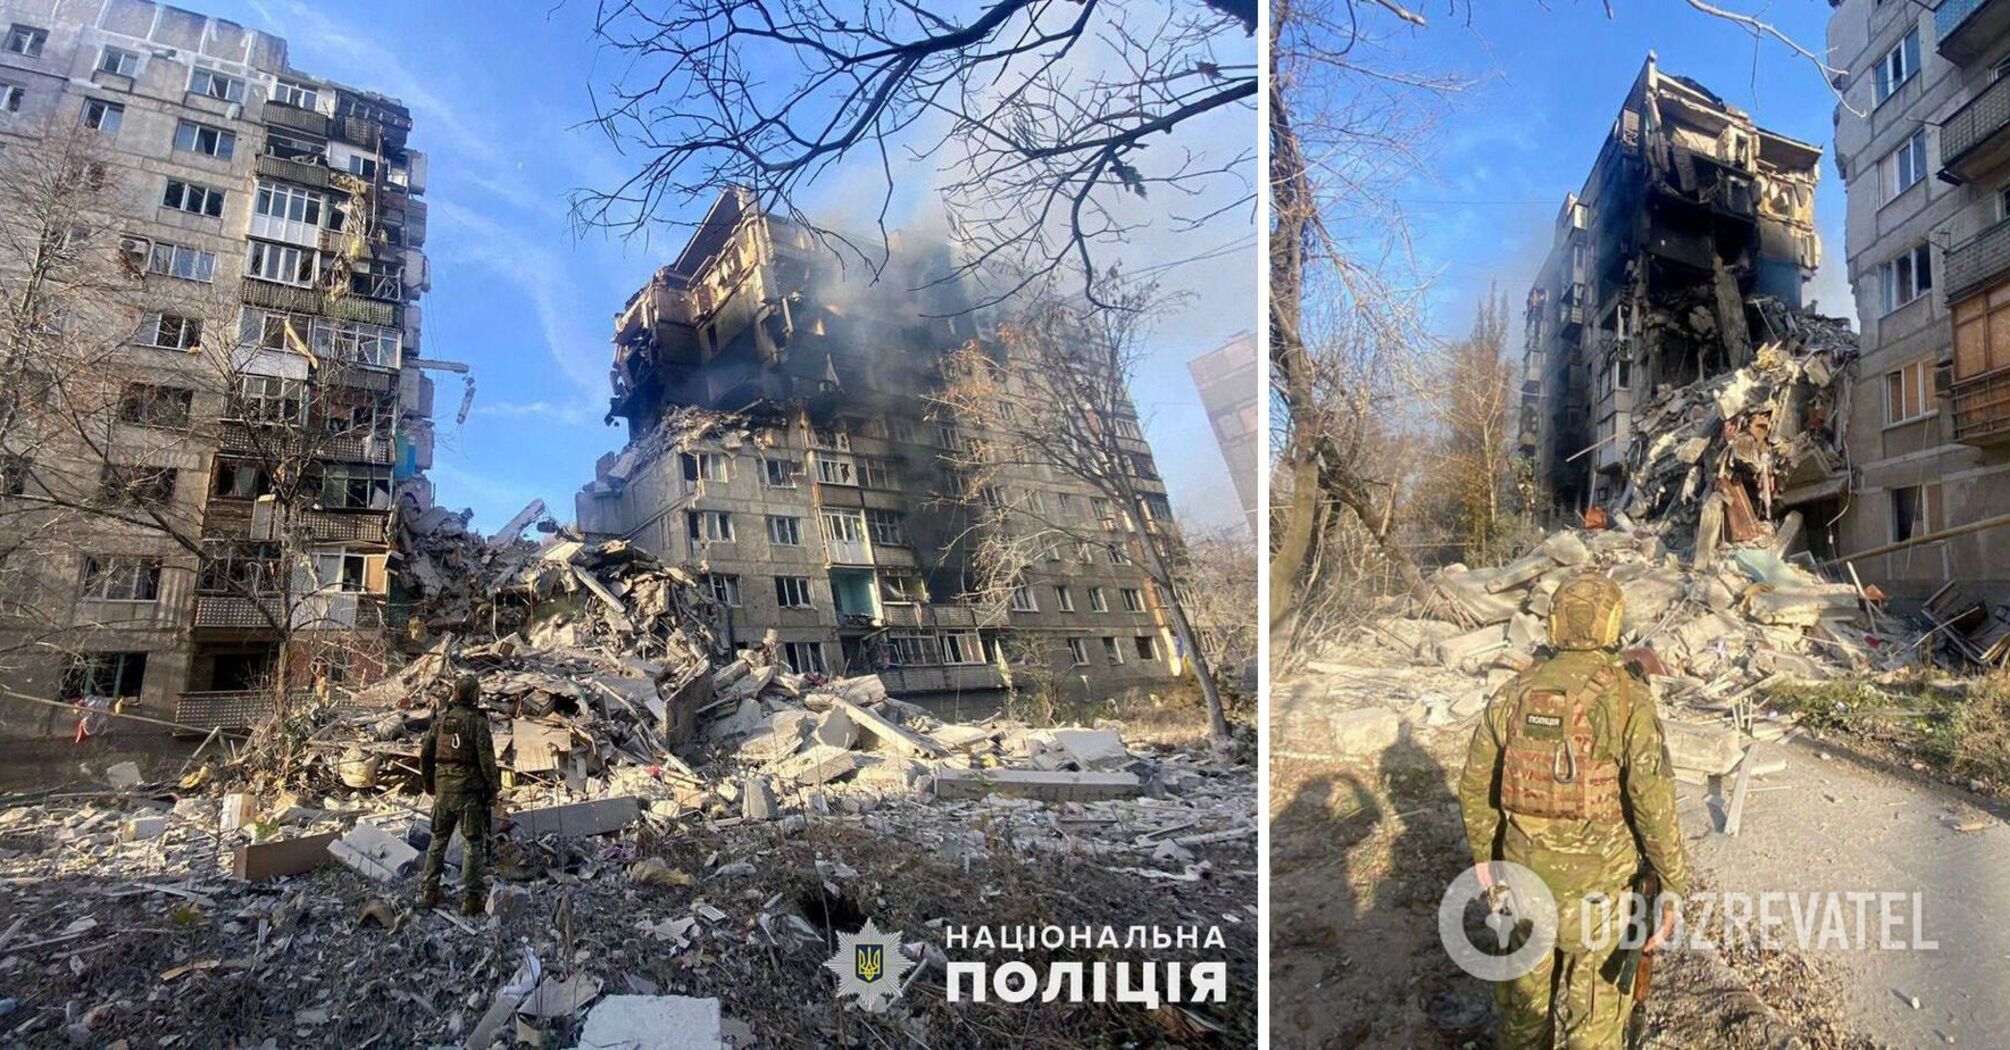 The enemy attacked a multi-storey building in Donbass